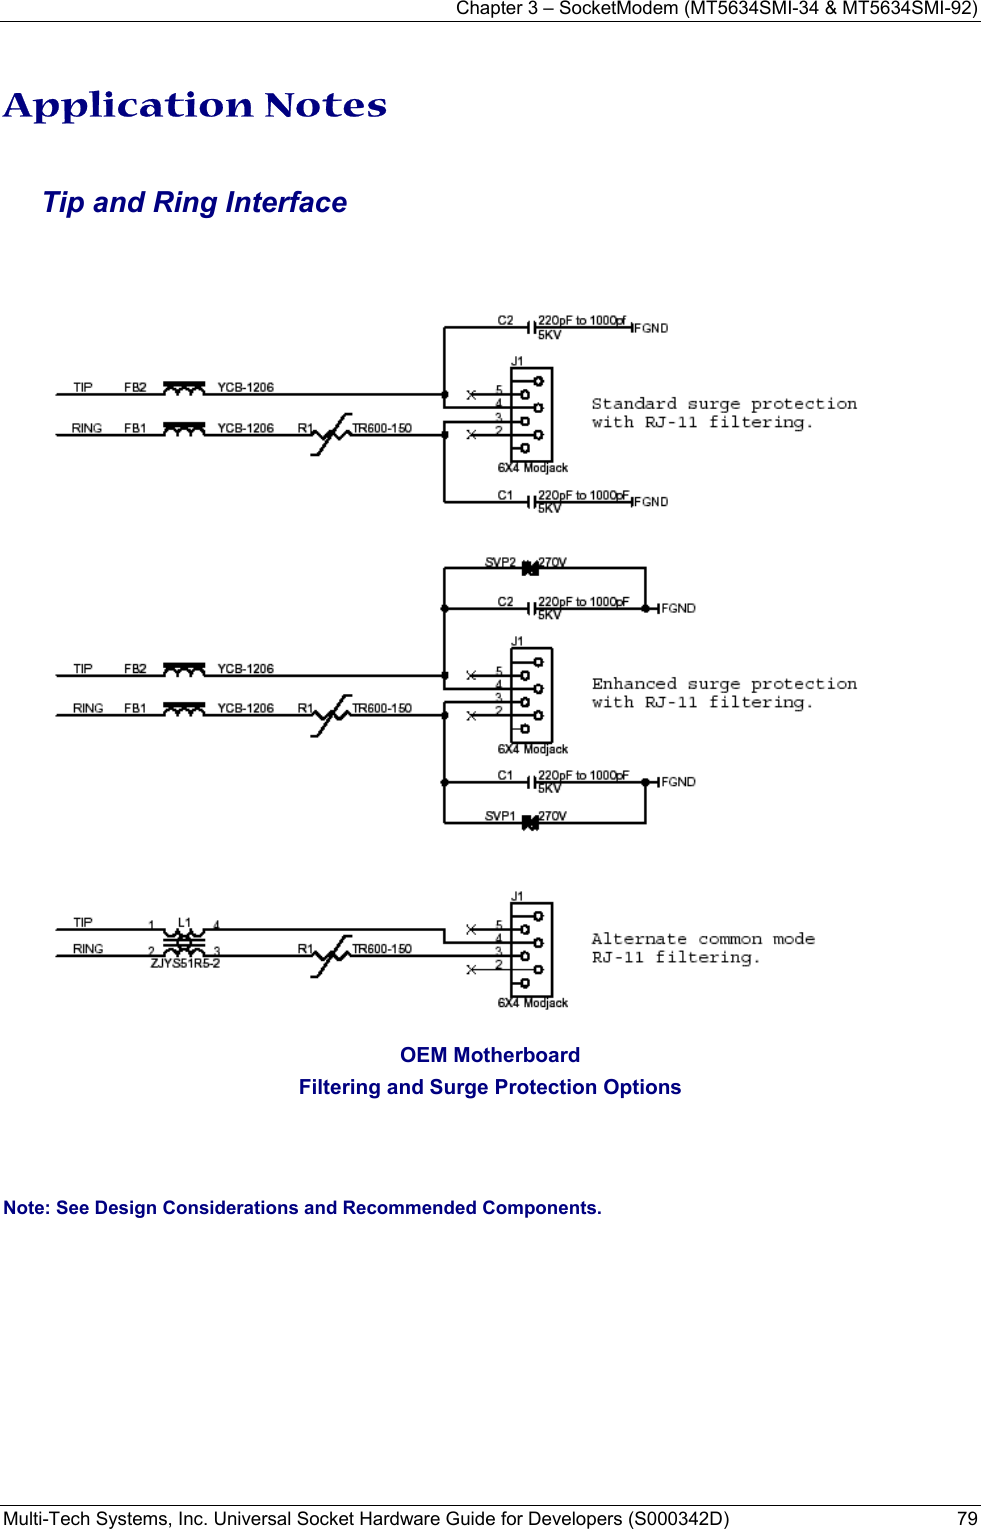 Chapter 3 – SocketModem (MT5634SMI-34 &amp; MT5634SMI-92) Multi-Tech Systems, Inc. Universal Socket Hardware Guide for Developers (S000342D)  79  Application Notes  Tip and Ring Interface    OEM Motherboard Filtering and Surge Protection Options   Note: See Design Considerations and Recommended Components.   